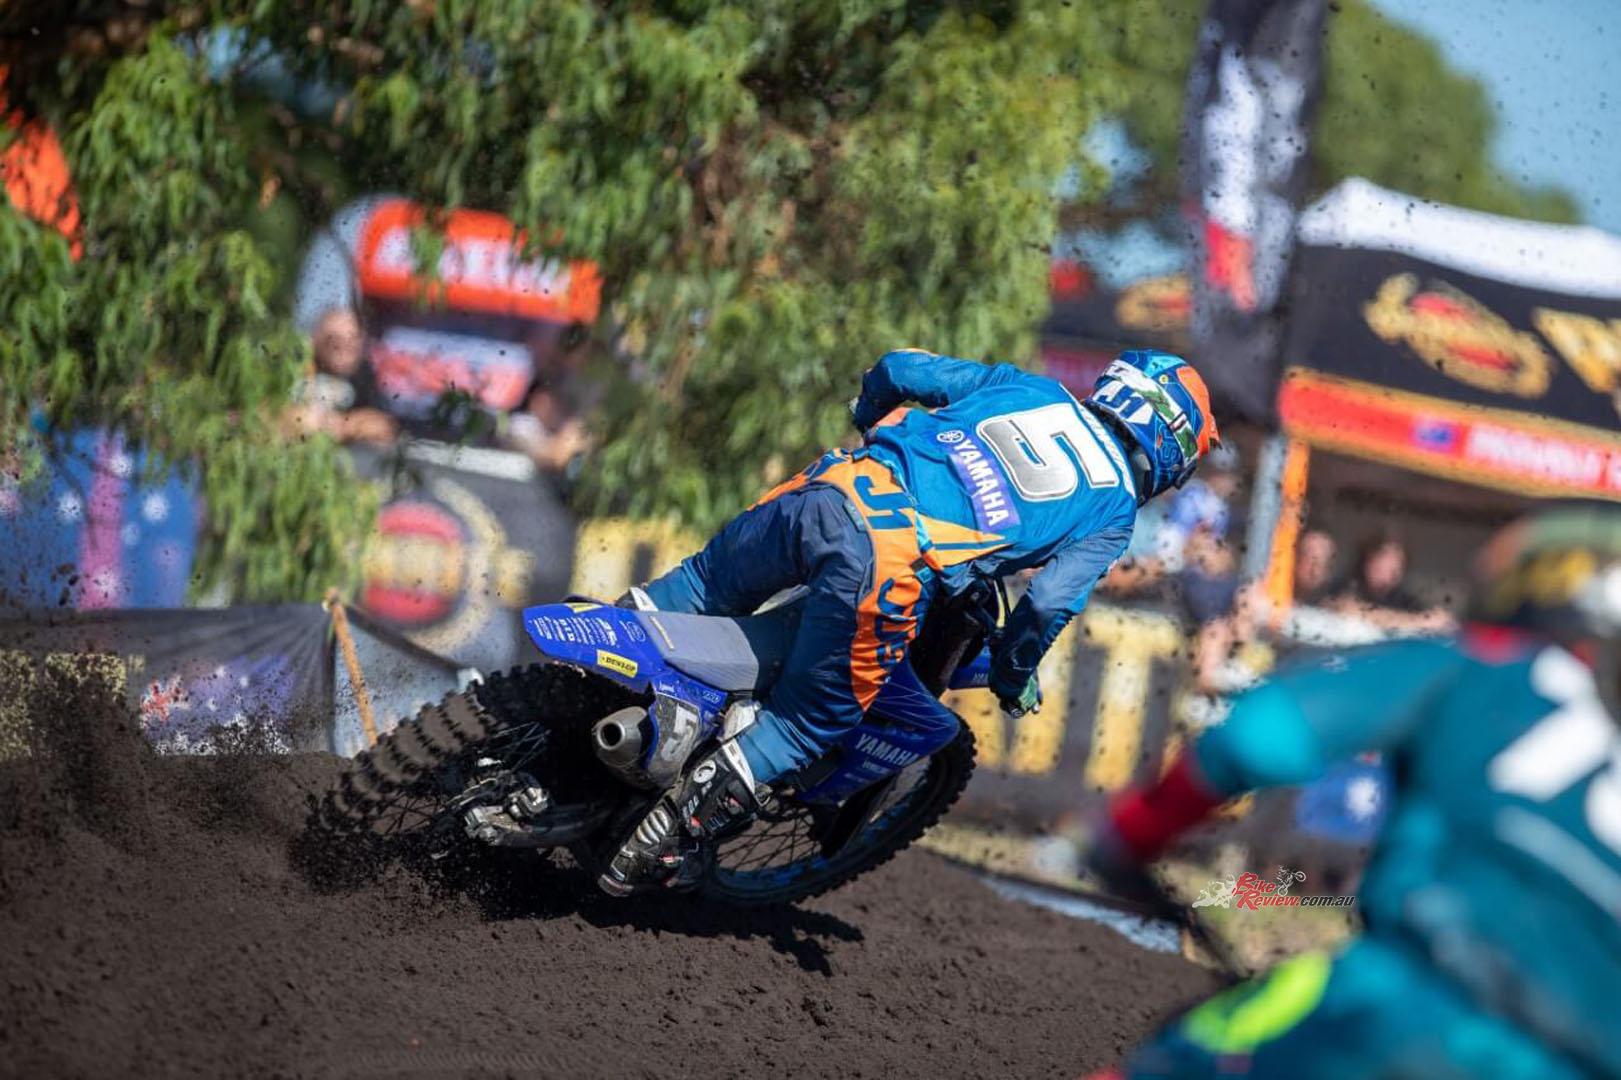 The second moto presented more challenges as Larwood mis-timed his jump from the gate and was mired mid pack as the 40-rider field charged through the first turn.